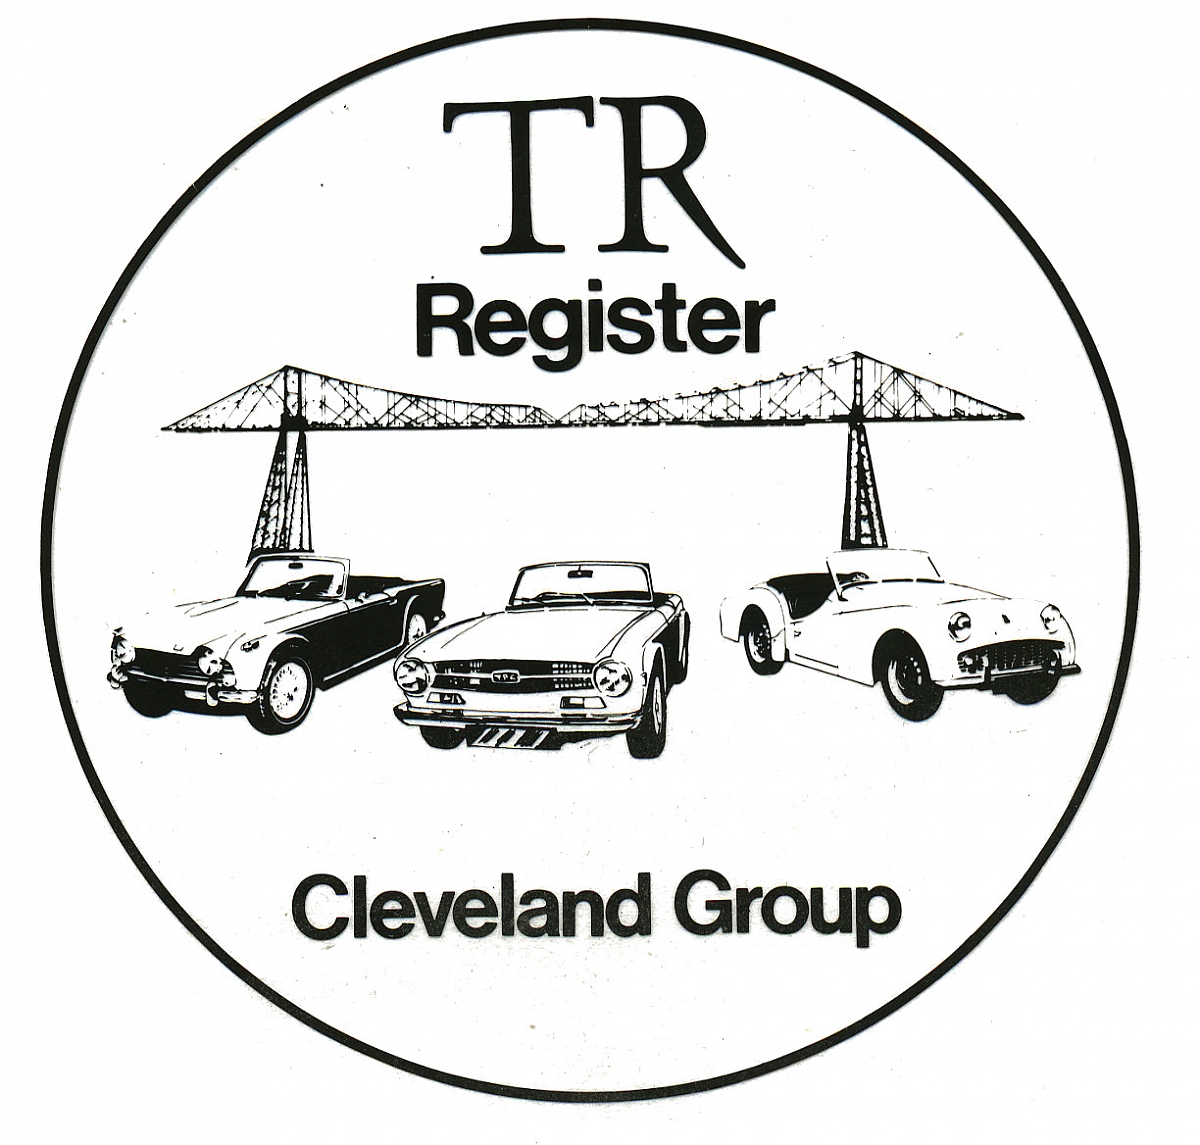 TR Register Cleveland Group Monthly Meeting